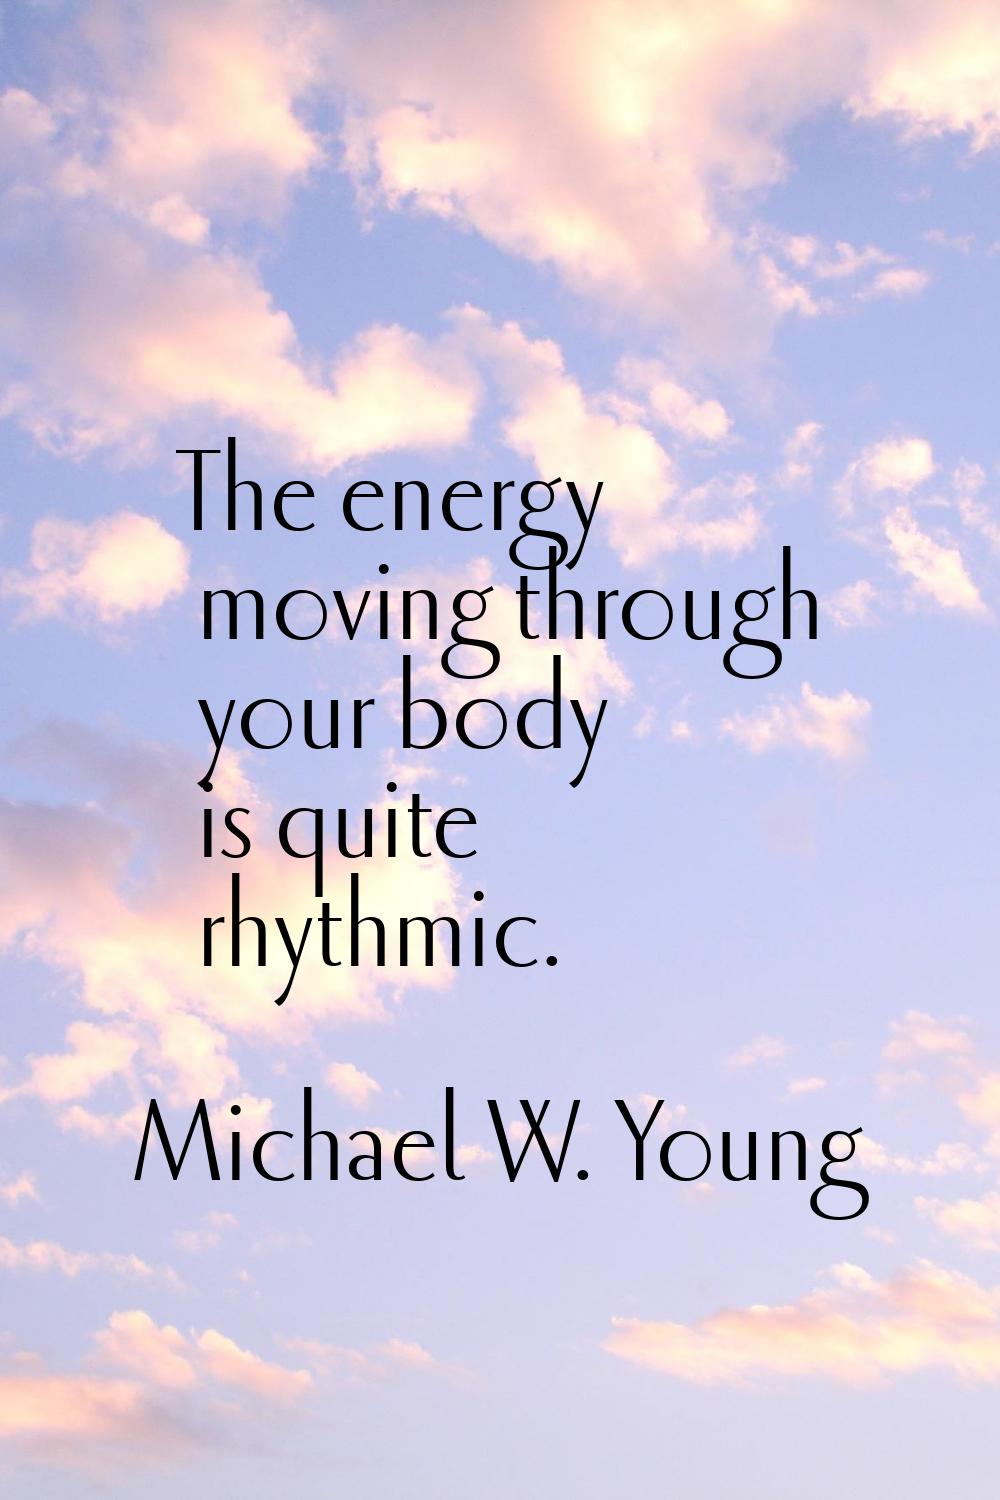 The energy moving through your body is quite rhythmic.